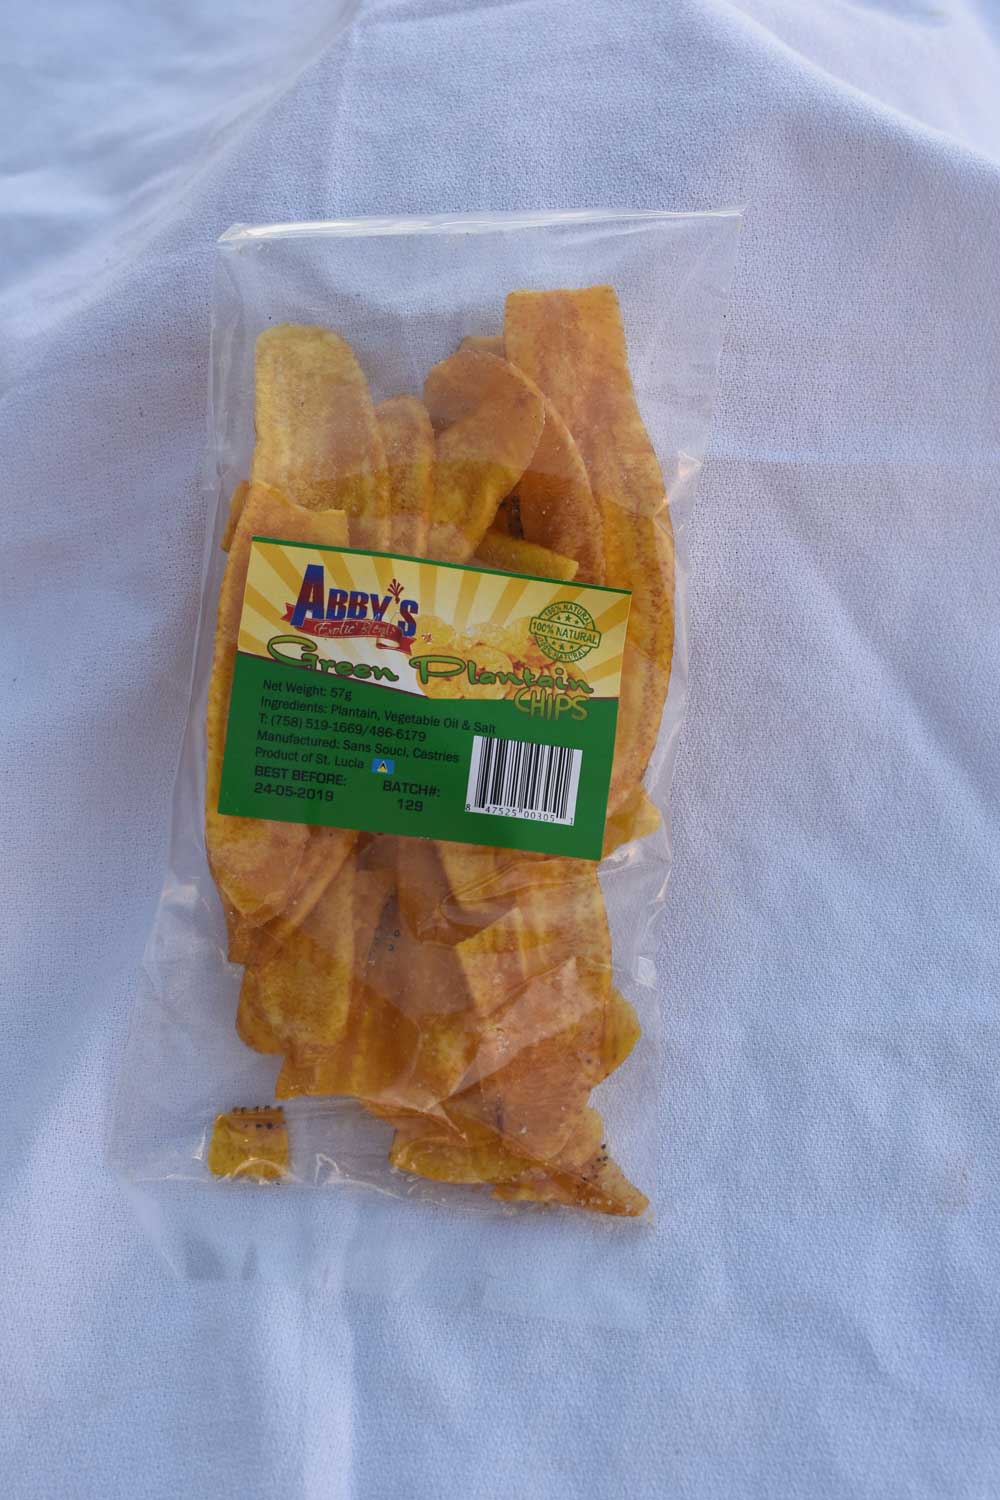 Green Plantain Chips